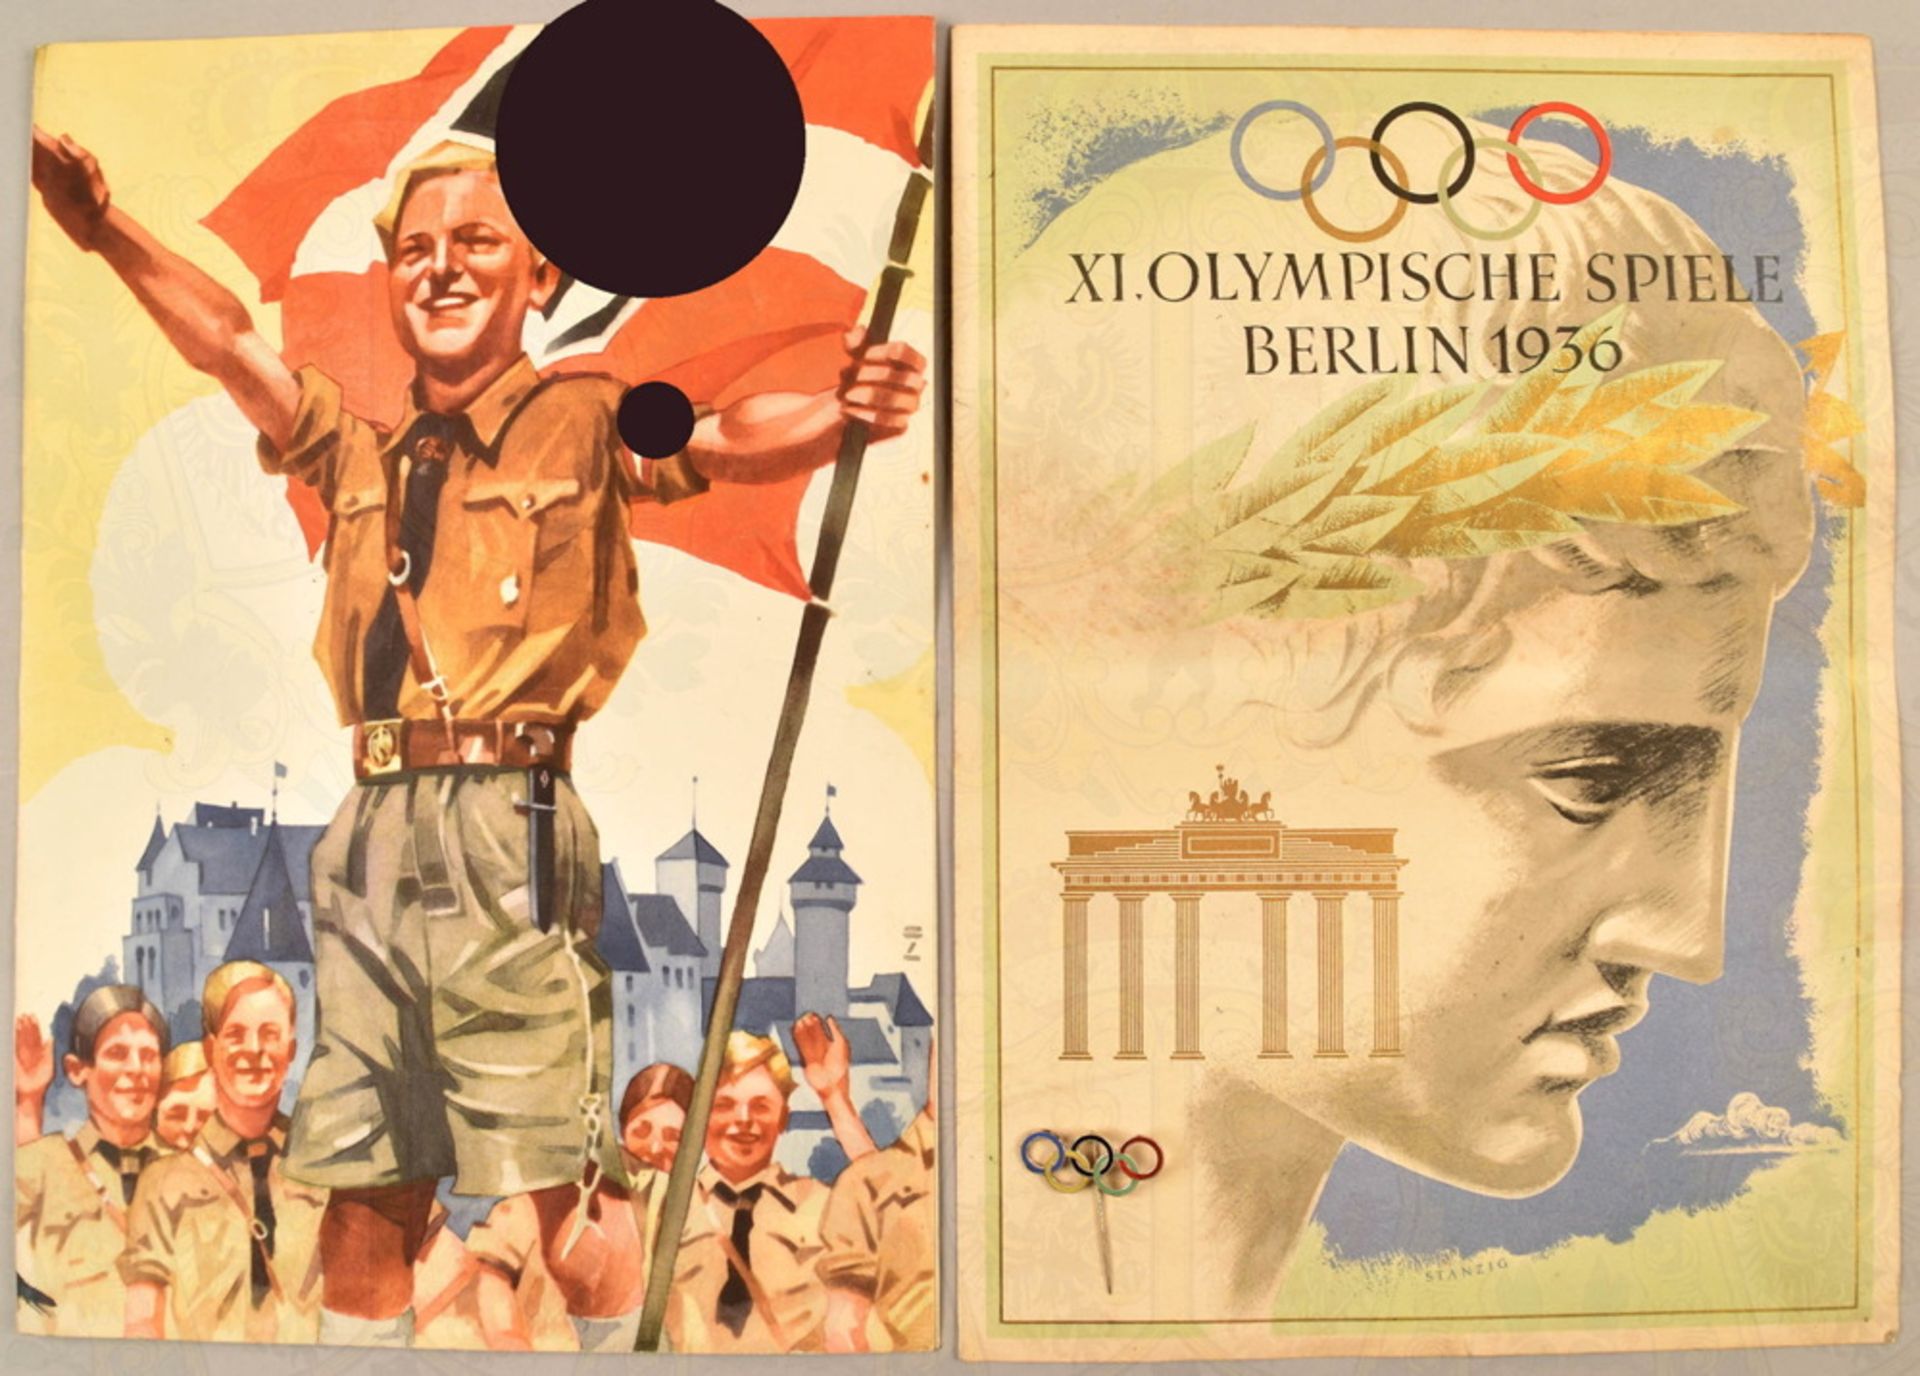 2 Reichspost telegrams 1936 and Olympic Games visitors badge